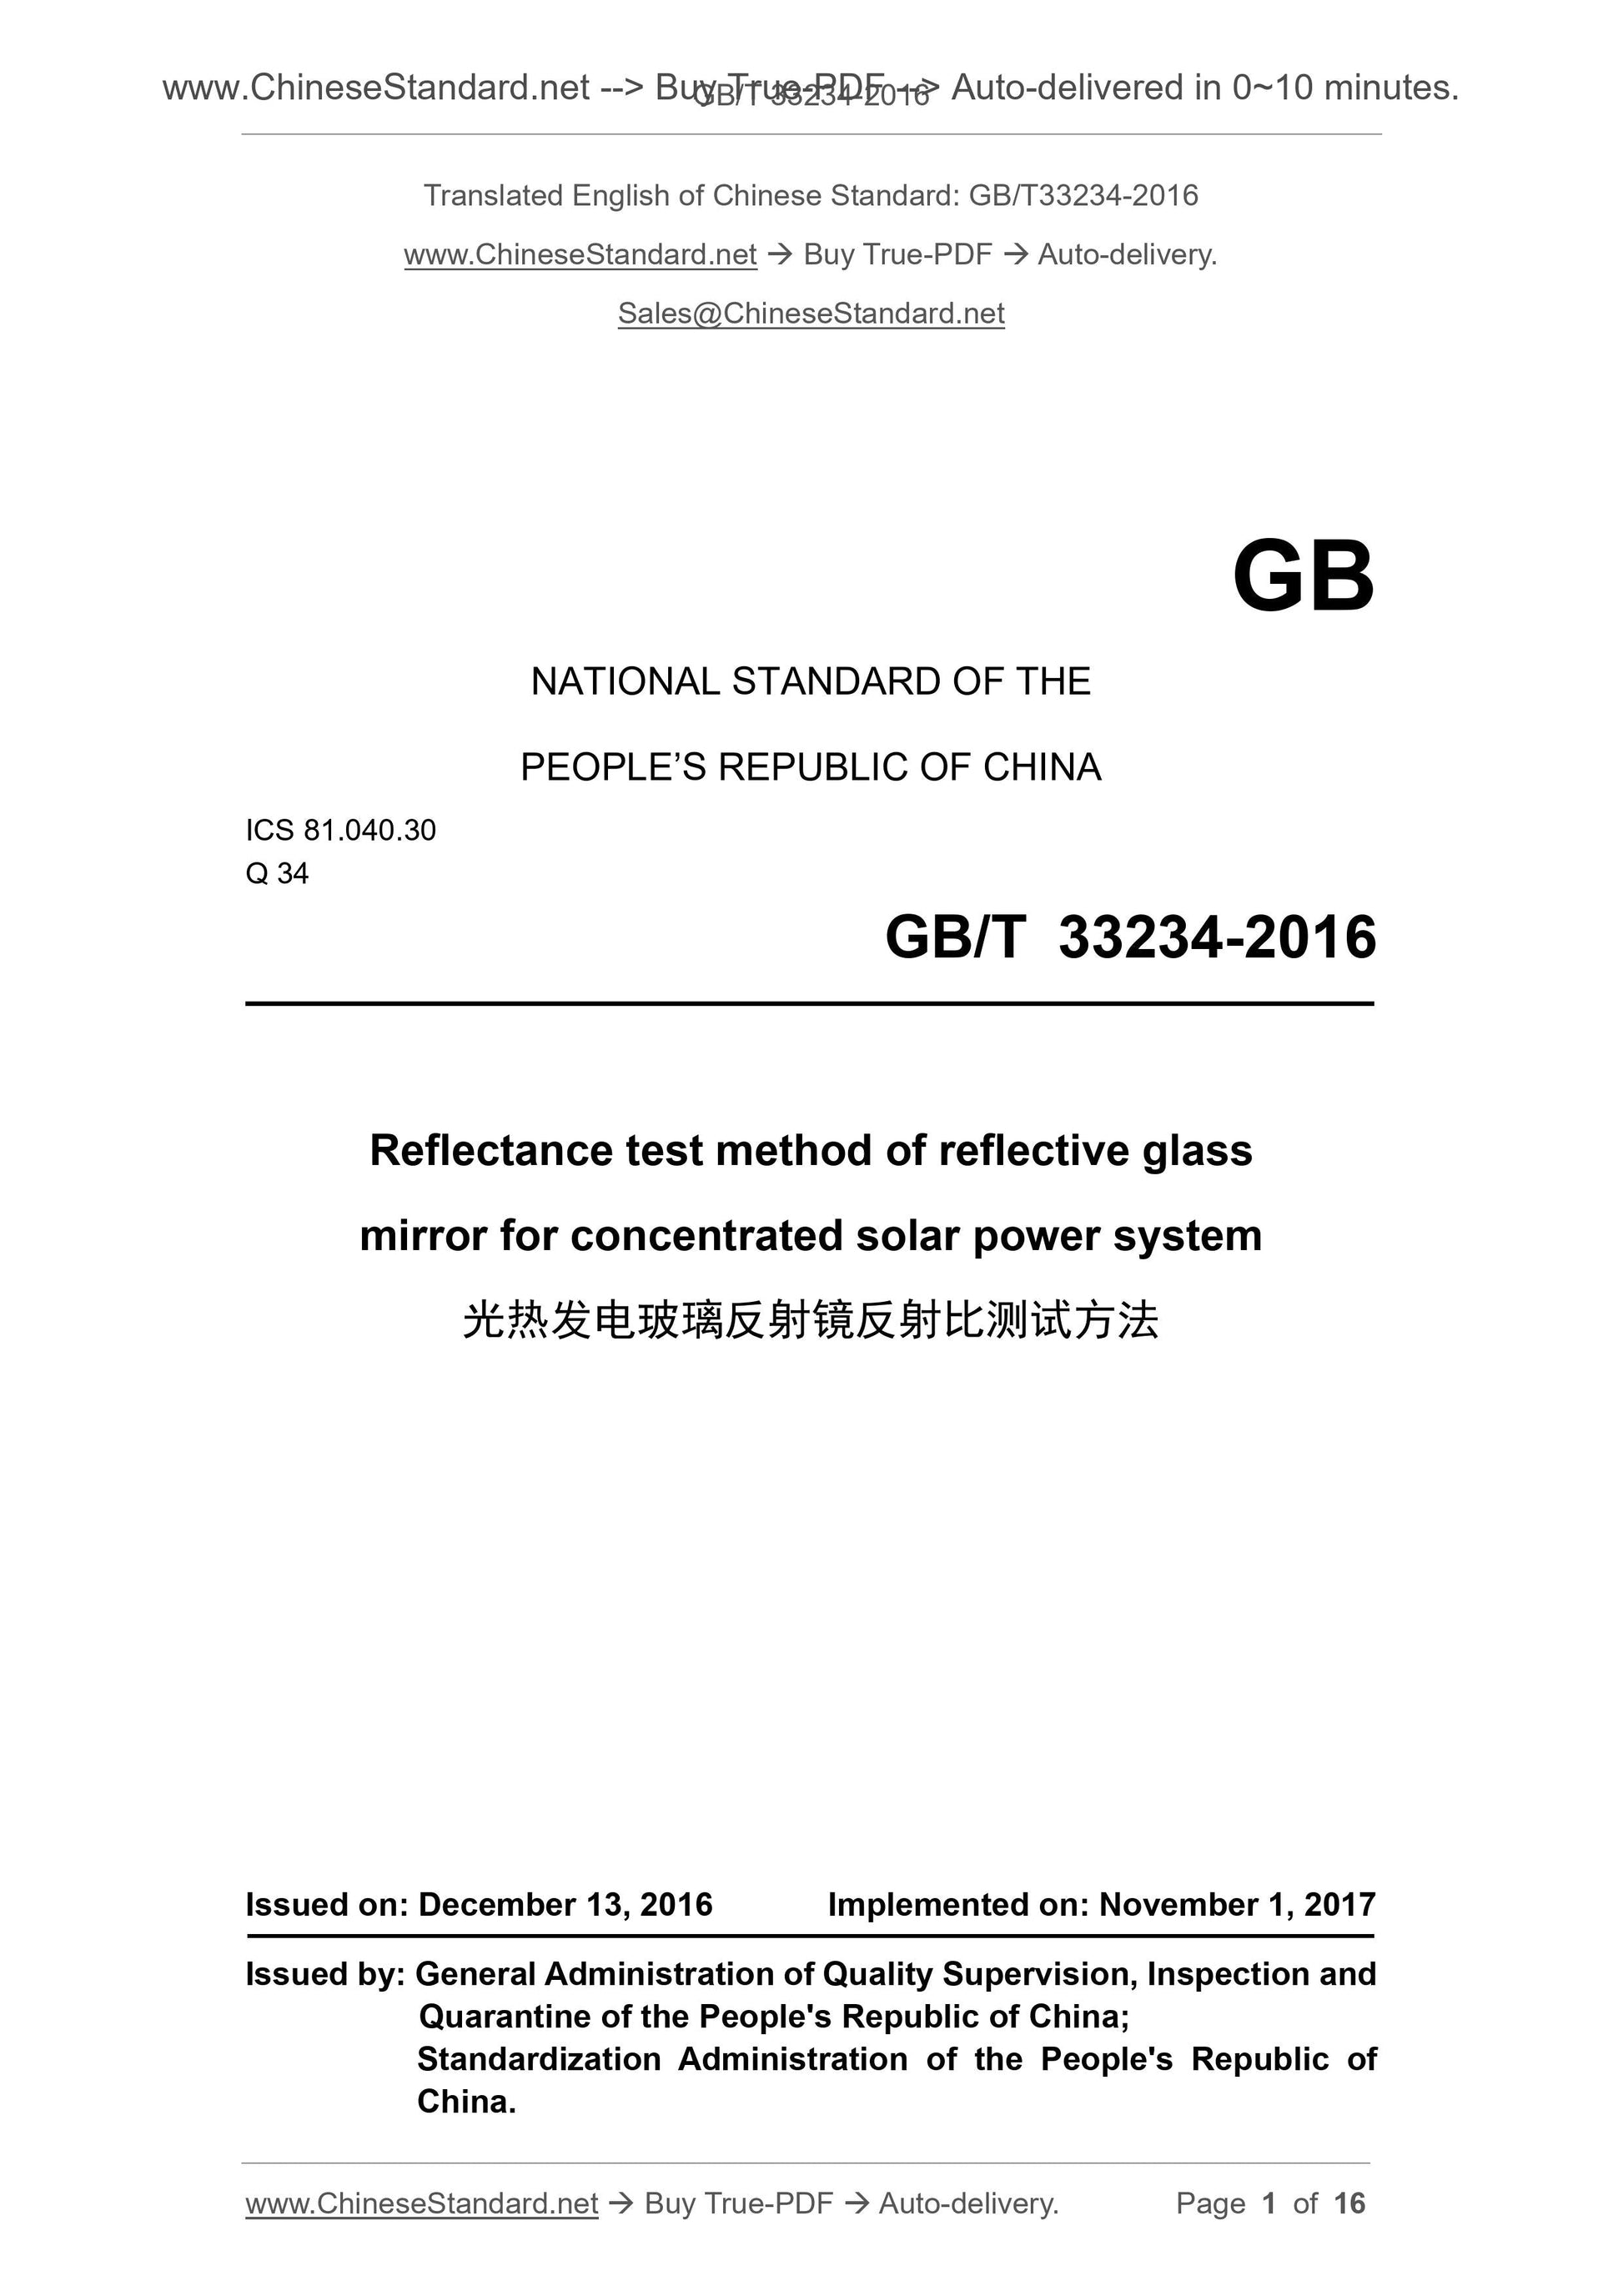 GB/T 33234-2016 Page 1